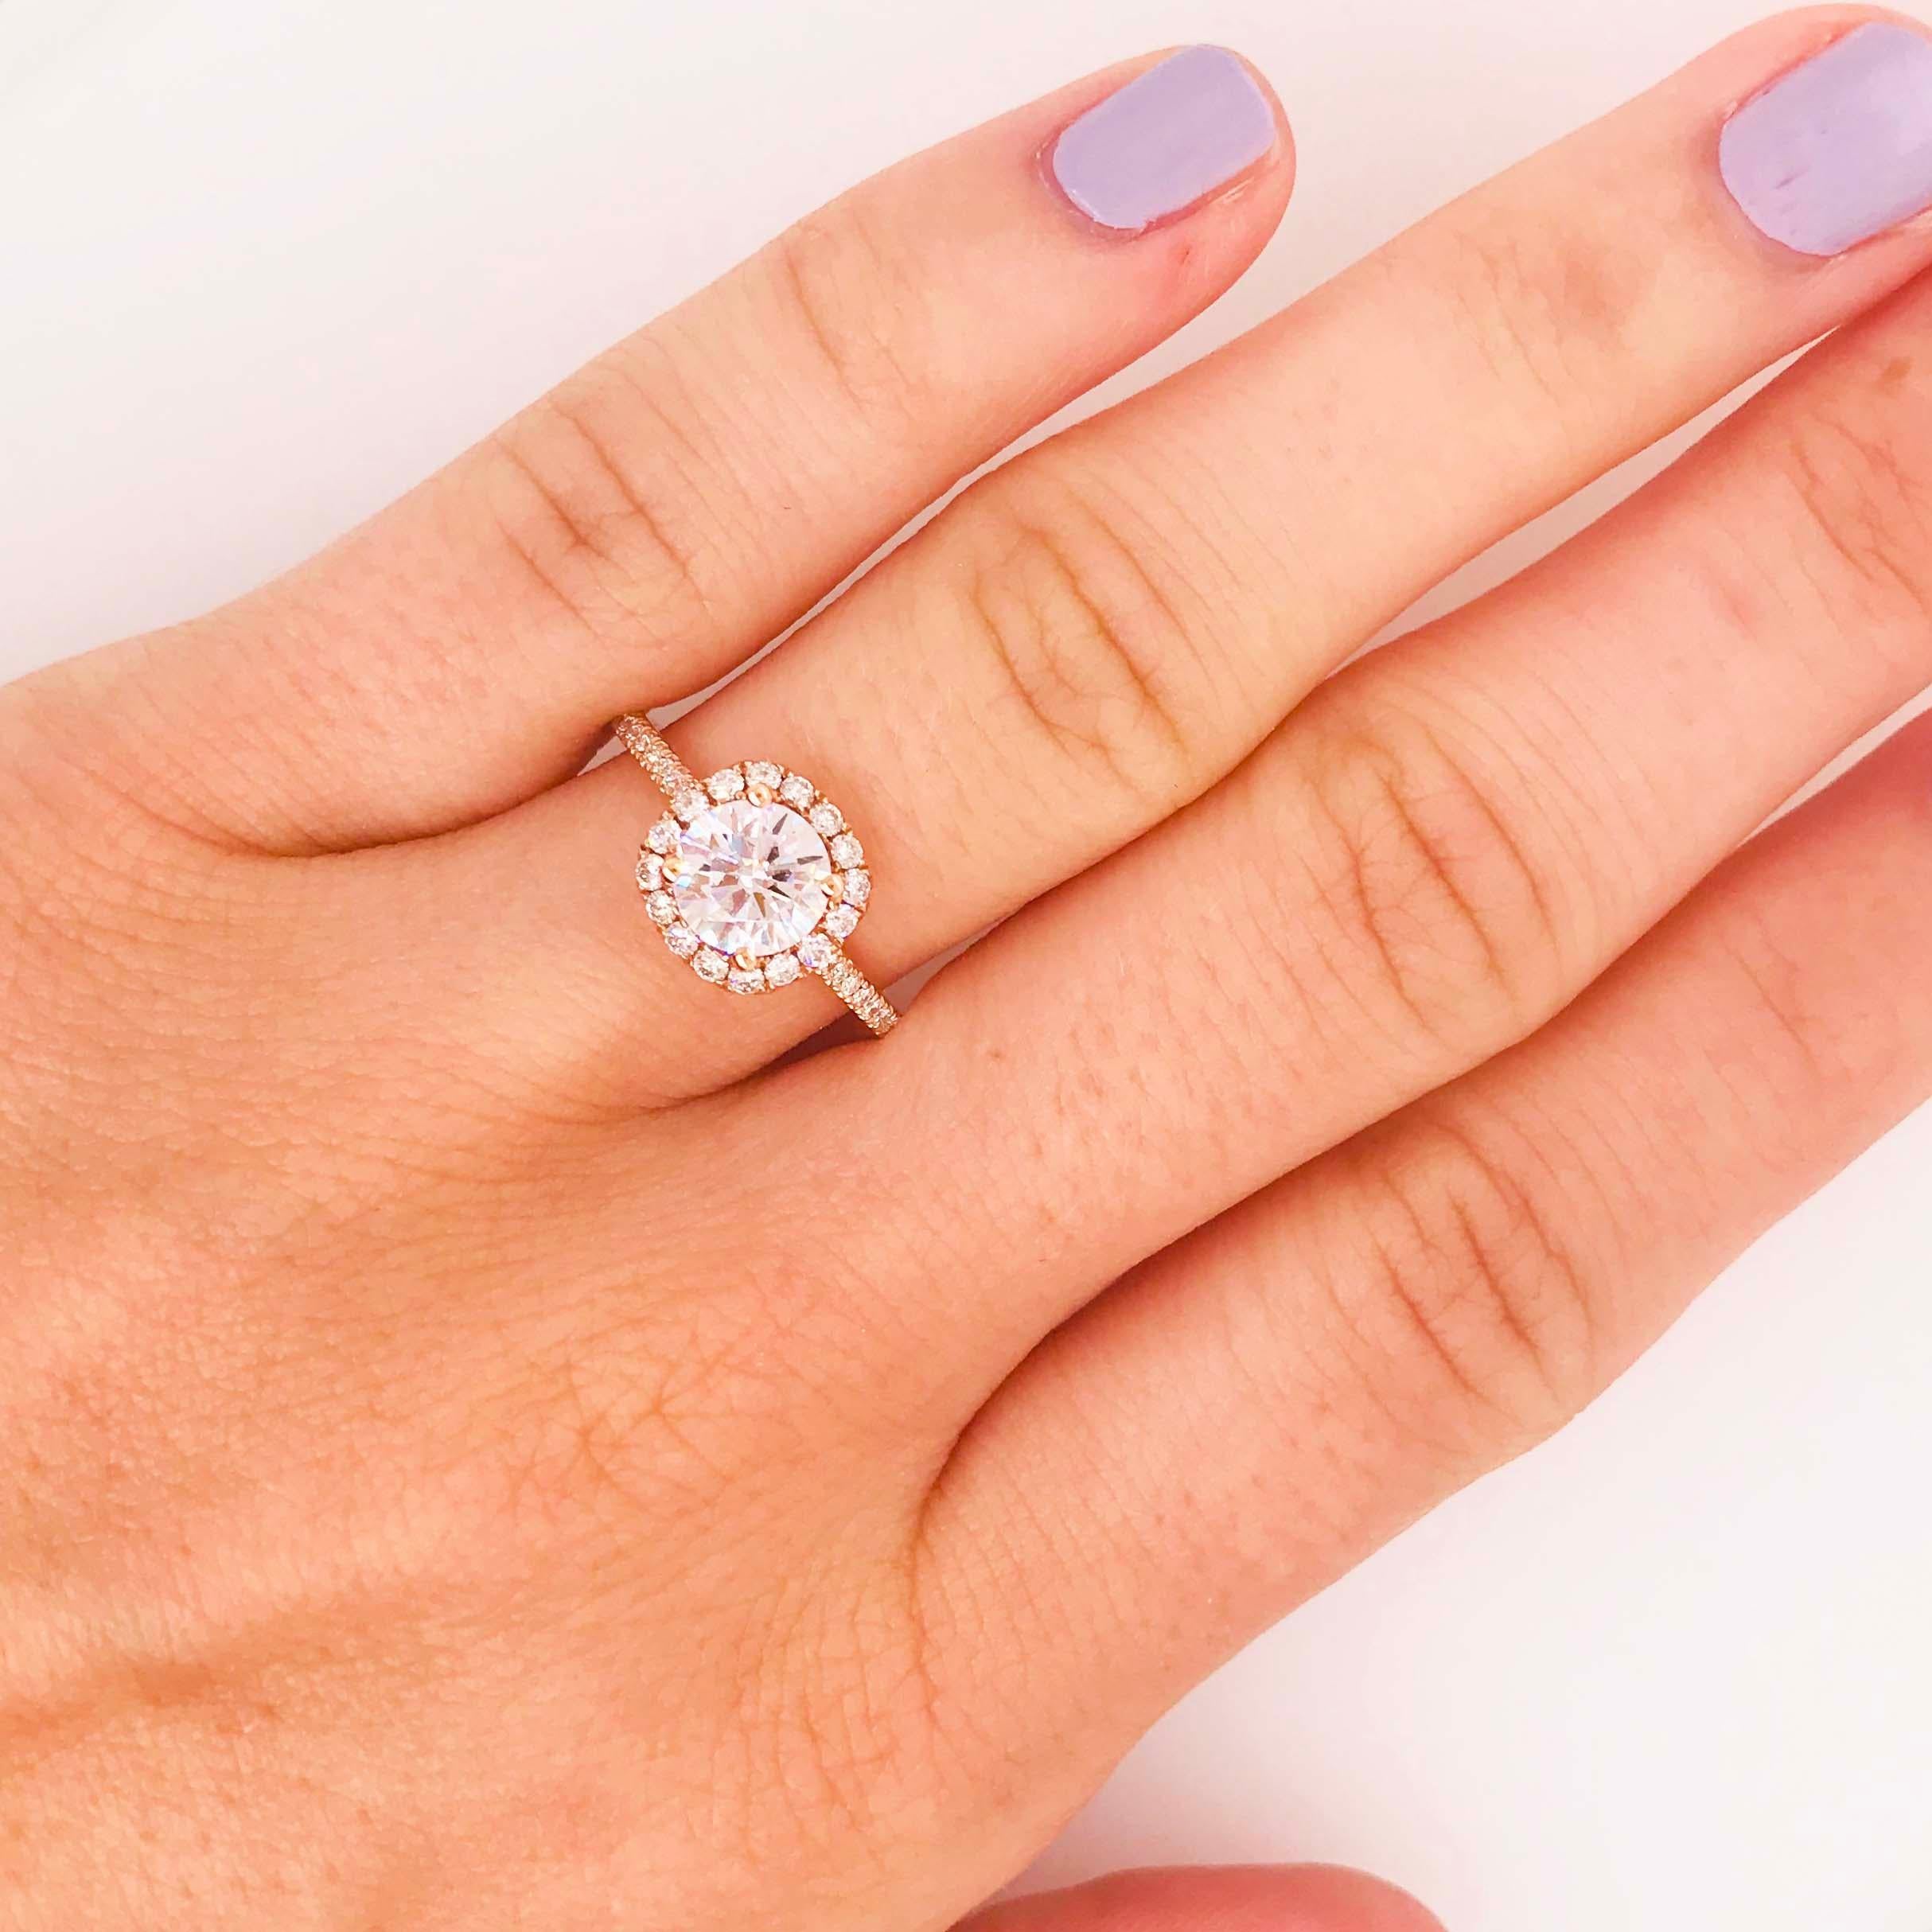 This diamond halo engagement ring has a round brilliant diamond GIA certified set in the center of a cushion shaped diamond halo! This engagement ring is classy and elegant! The engagement ring is 14 karat rose gold with bright white diamonds. The